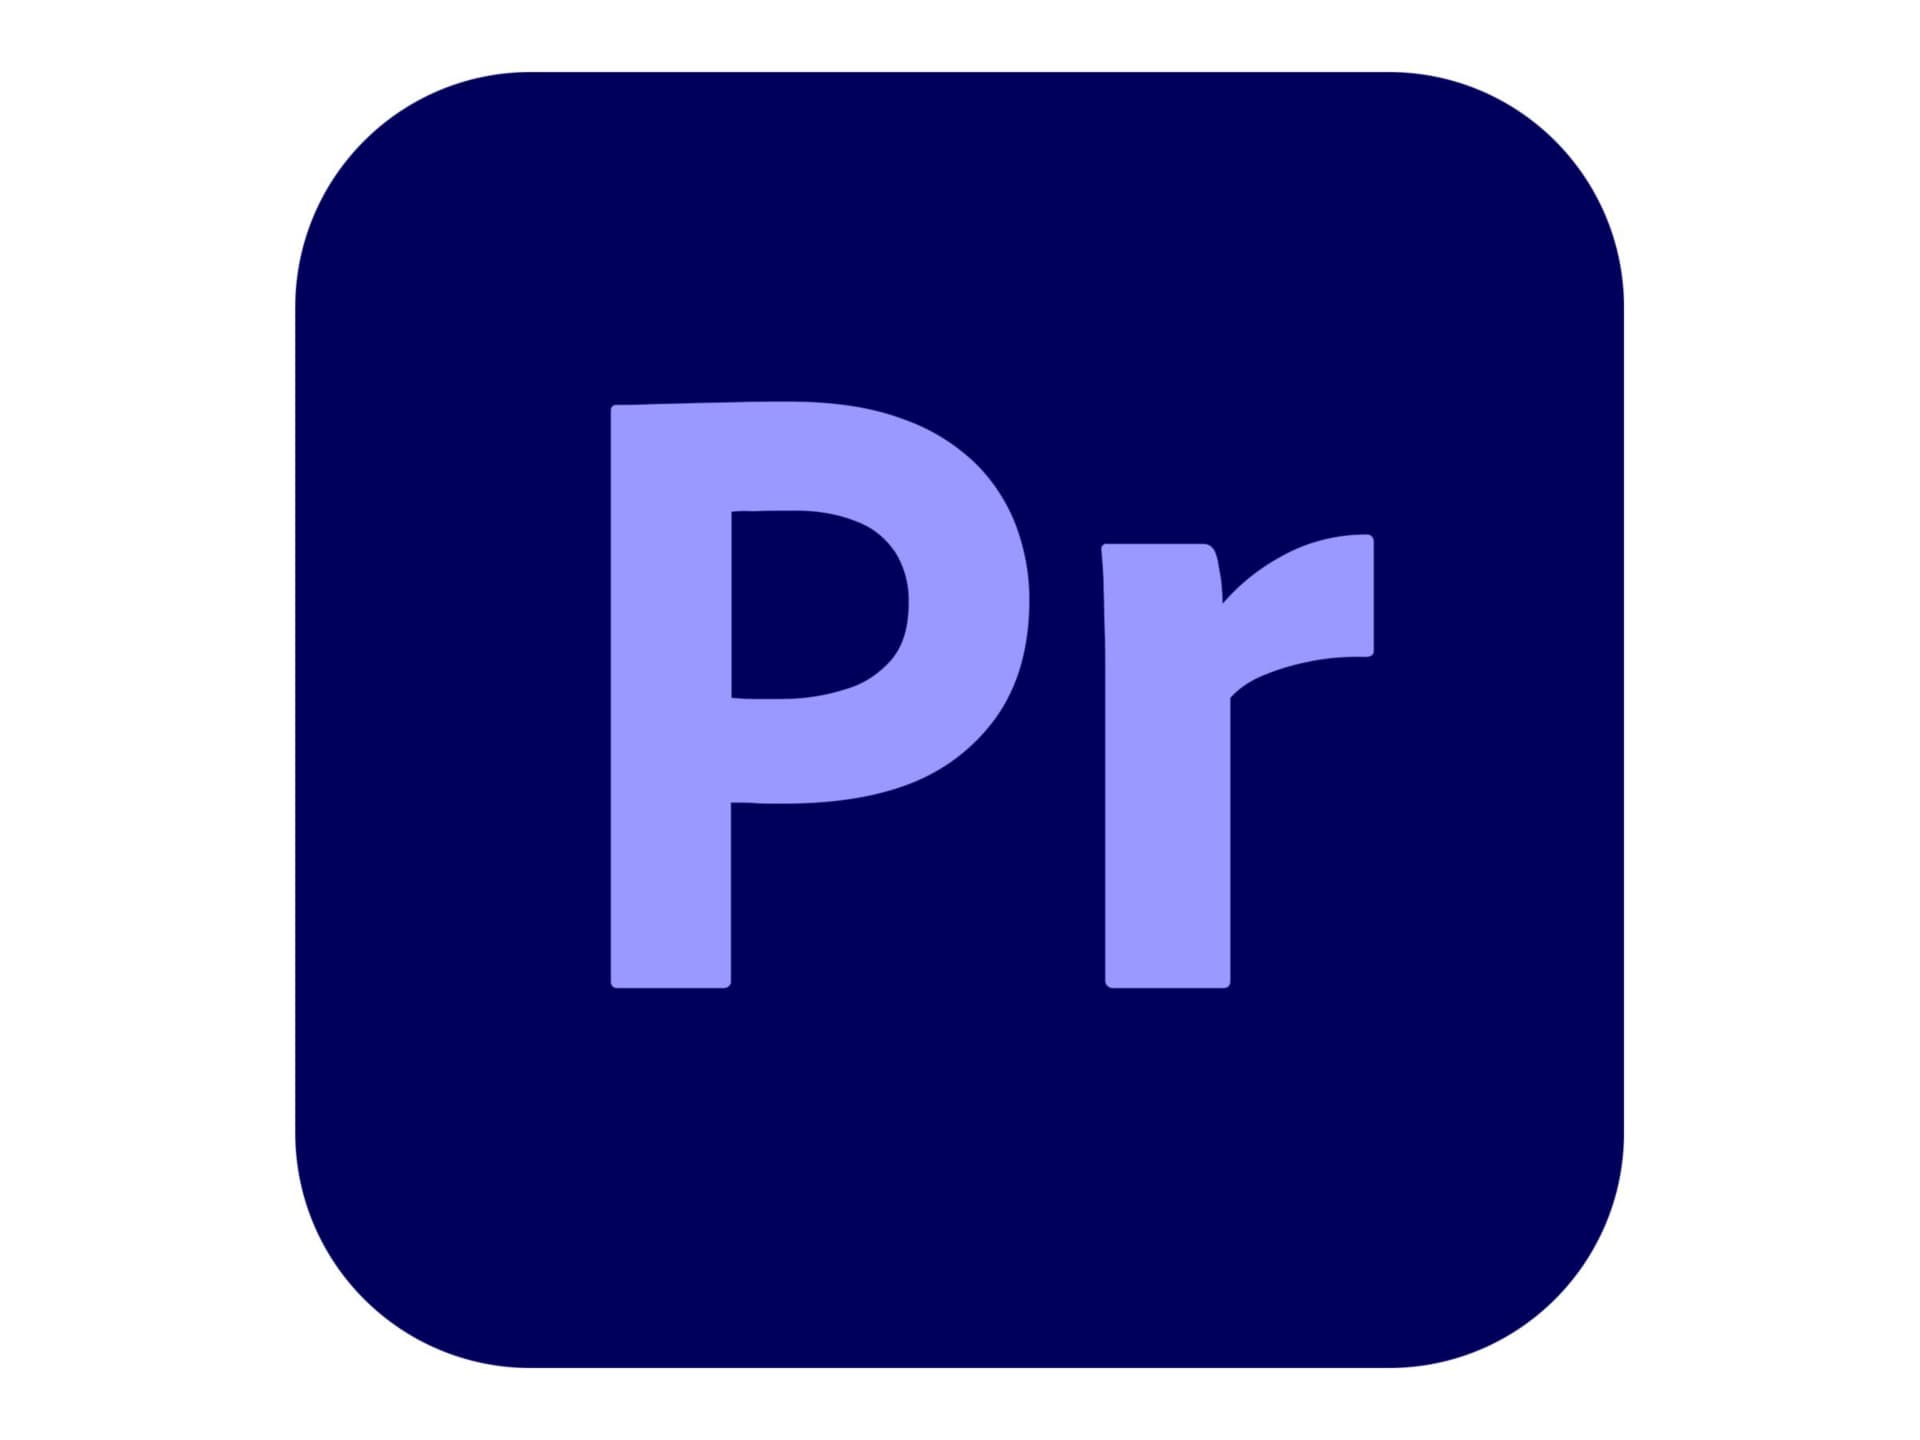 Adobe Premiere Pro CC for teams - Subscription New (5 months) - 1 named use